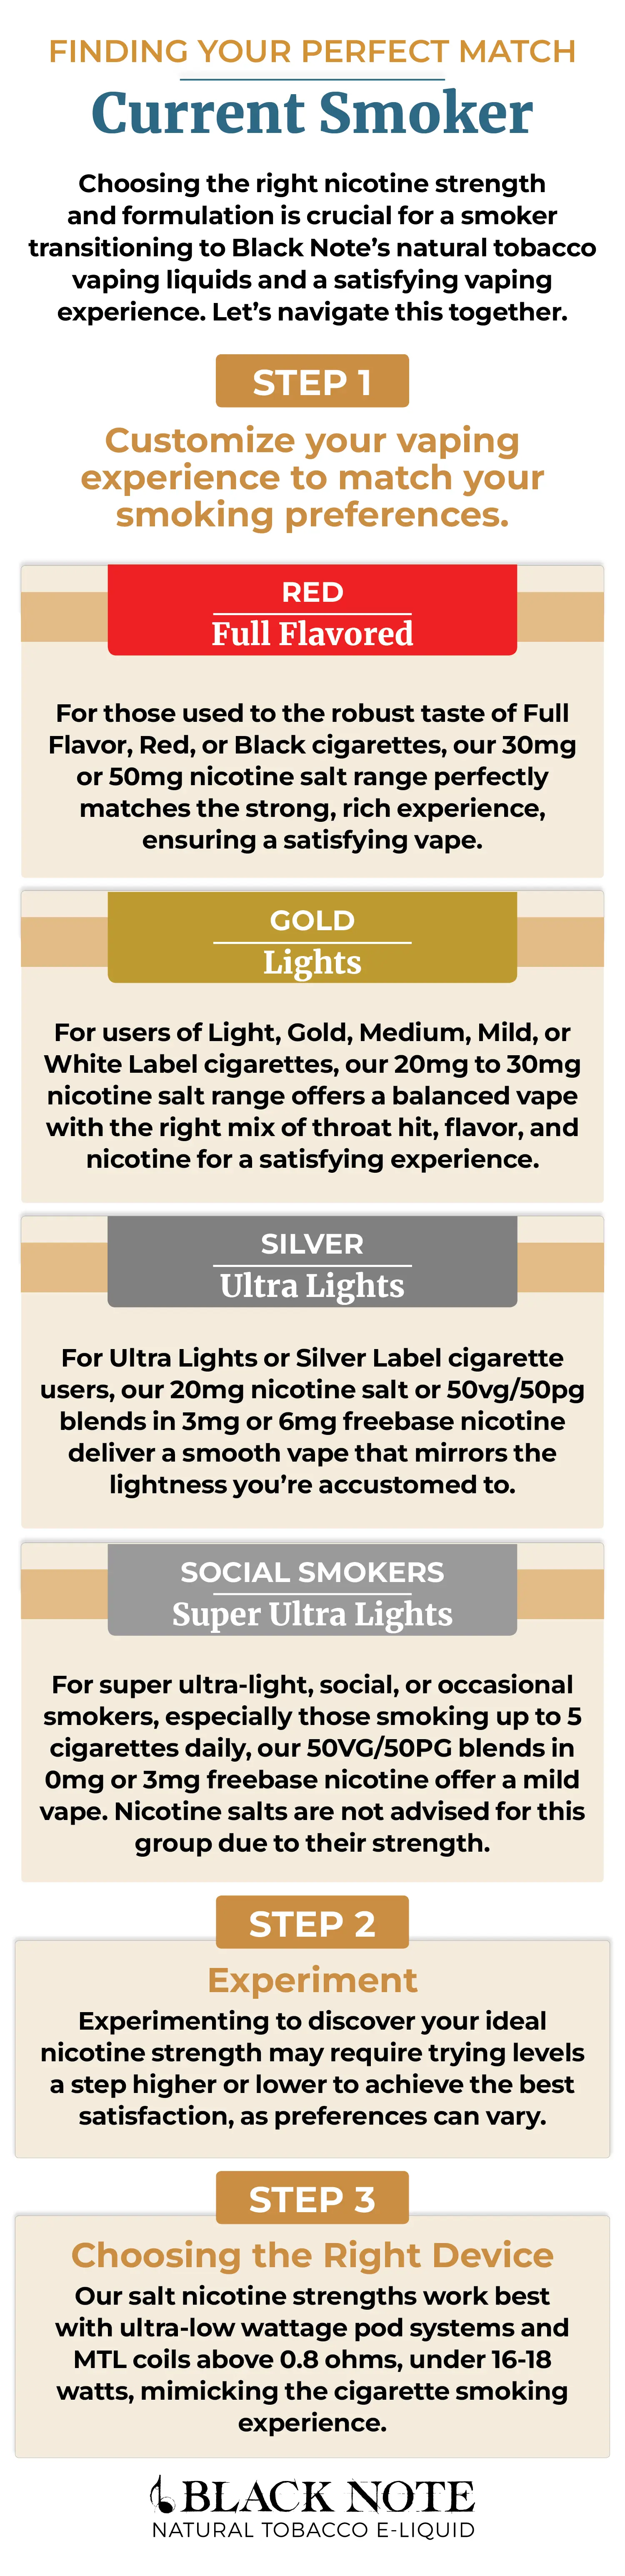 Infographic helping smokers find a perfect vape match with Black Note